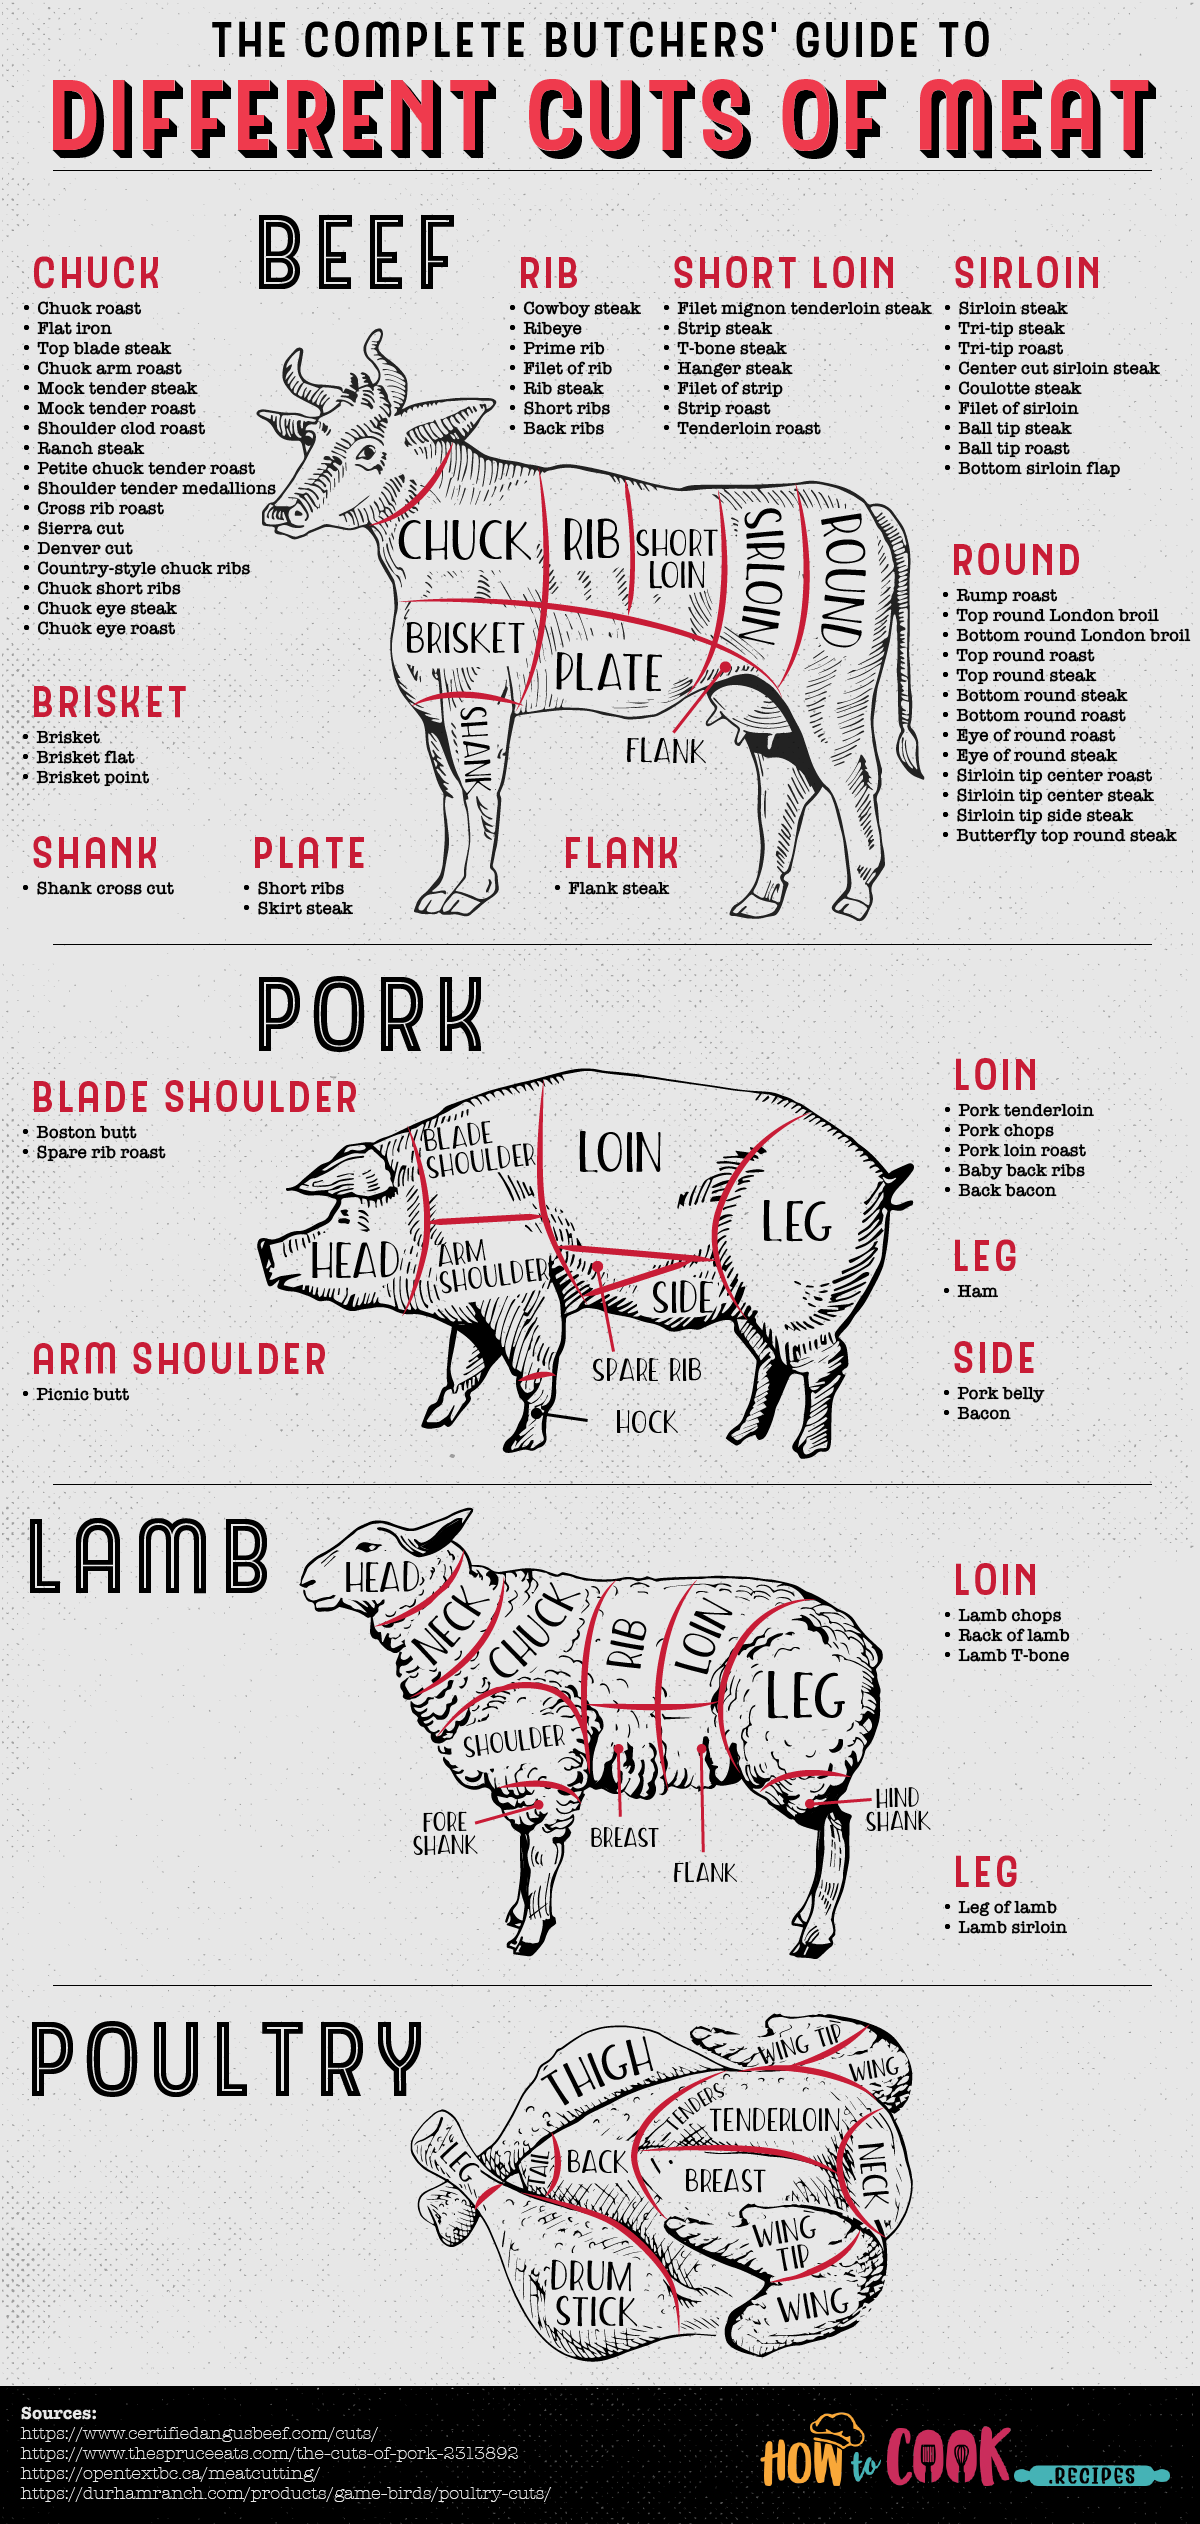 The Complete Butchers' Guide to Different Cuts of Meat for Beef, Pork, Lamb, and Poultry